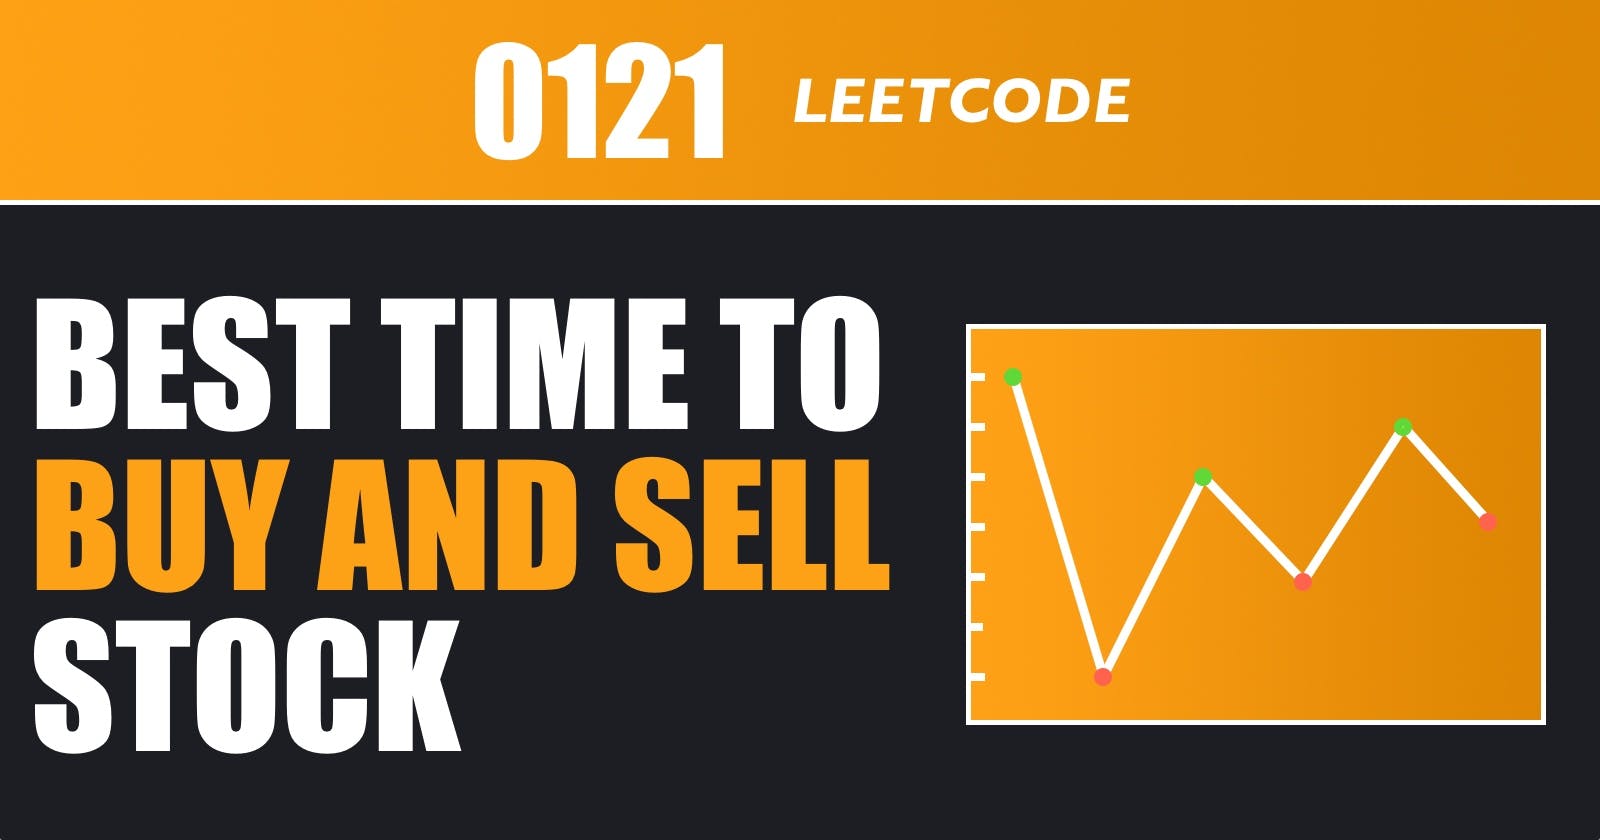 Best Time to Buy and Sell Stock - Leetcode 121